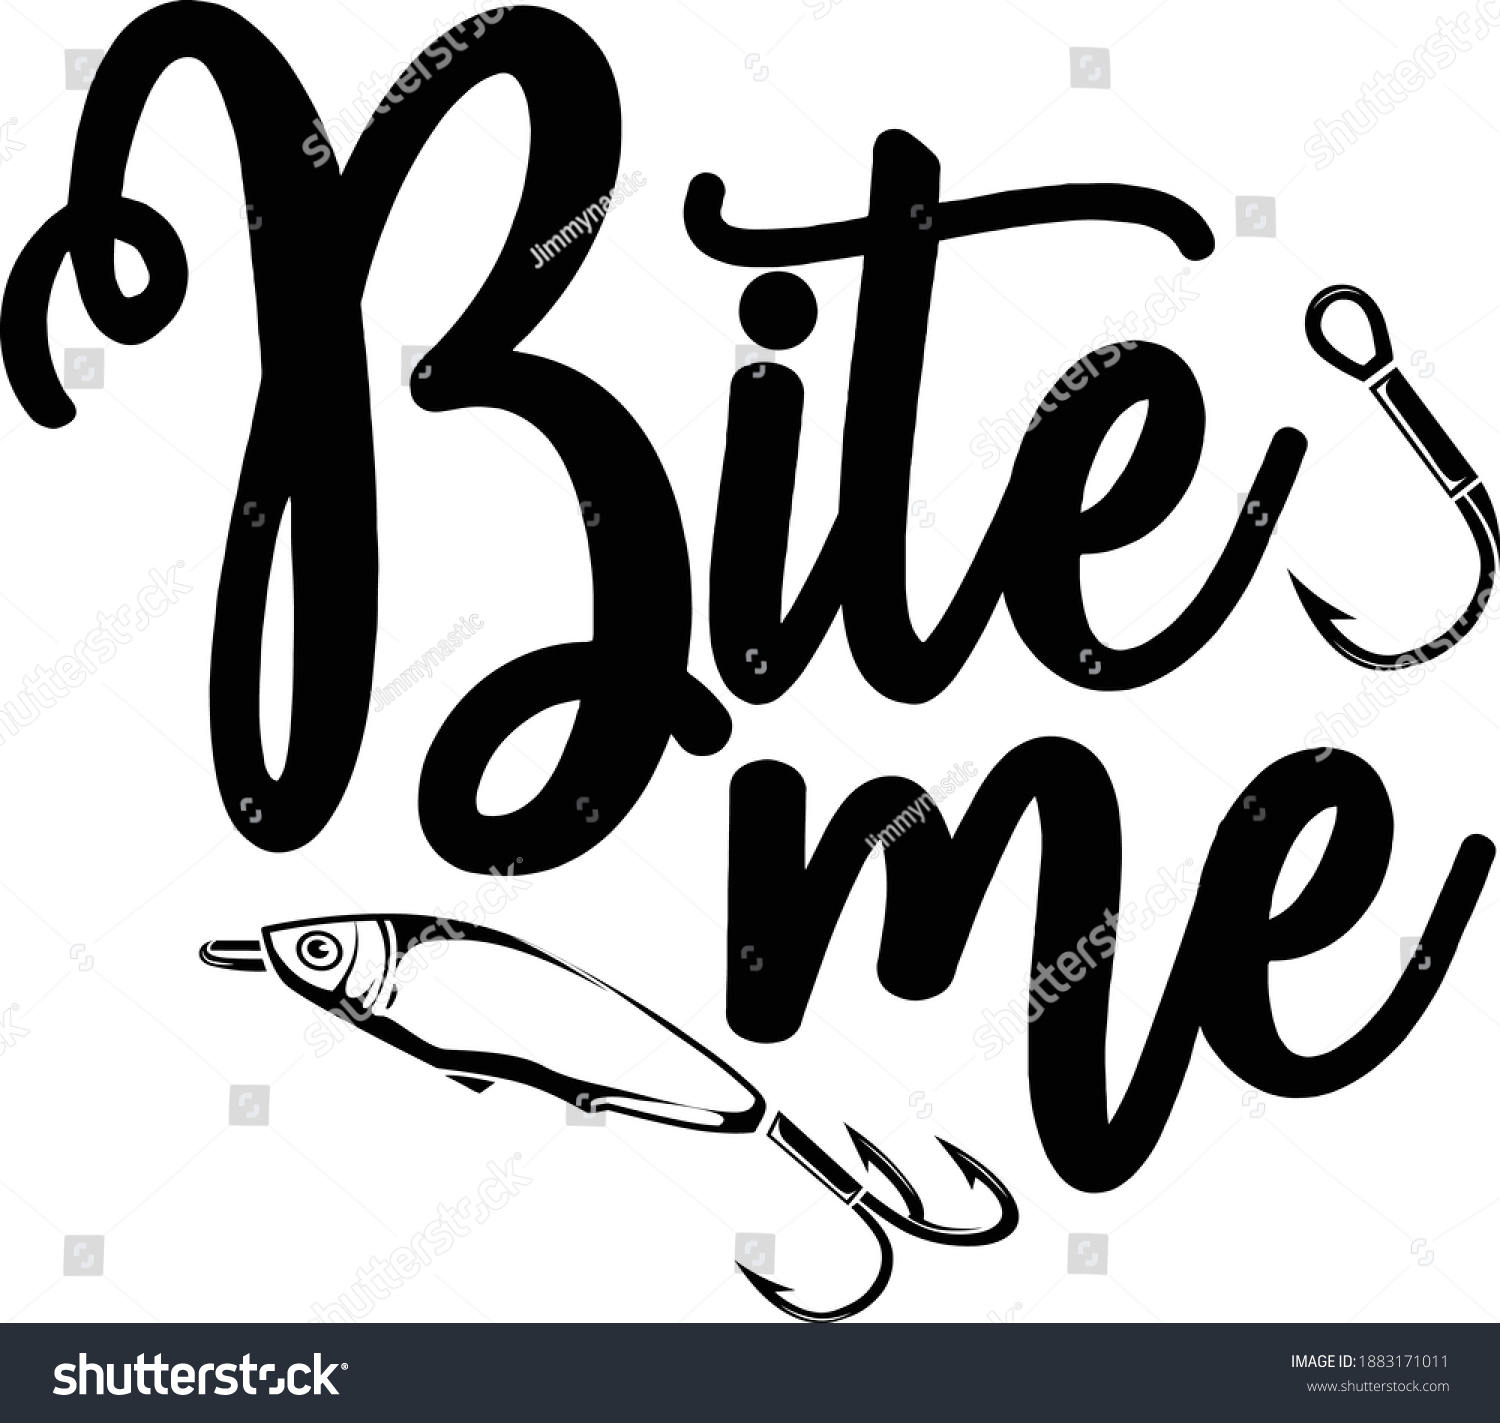 Download Bite Me Fishing Svg Download Stock Vector Royalty Free 1883171011